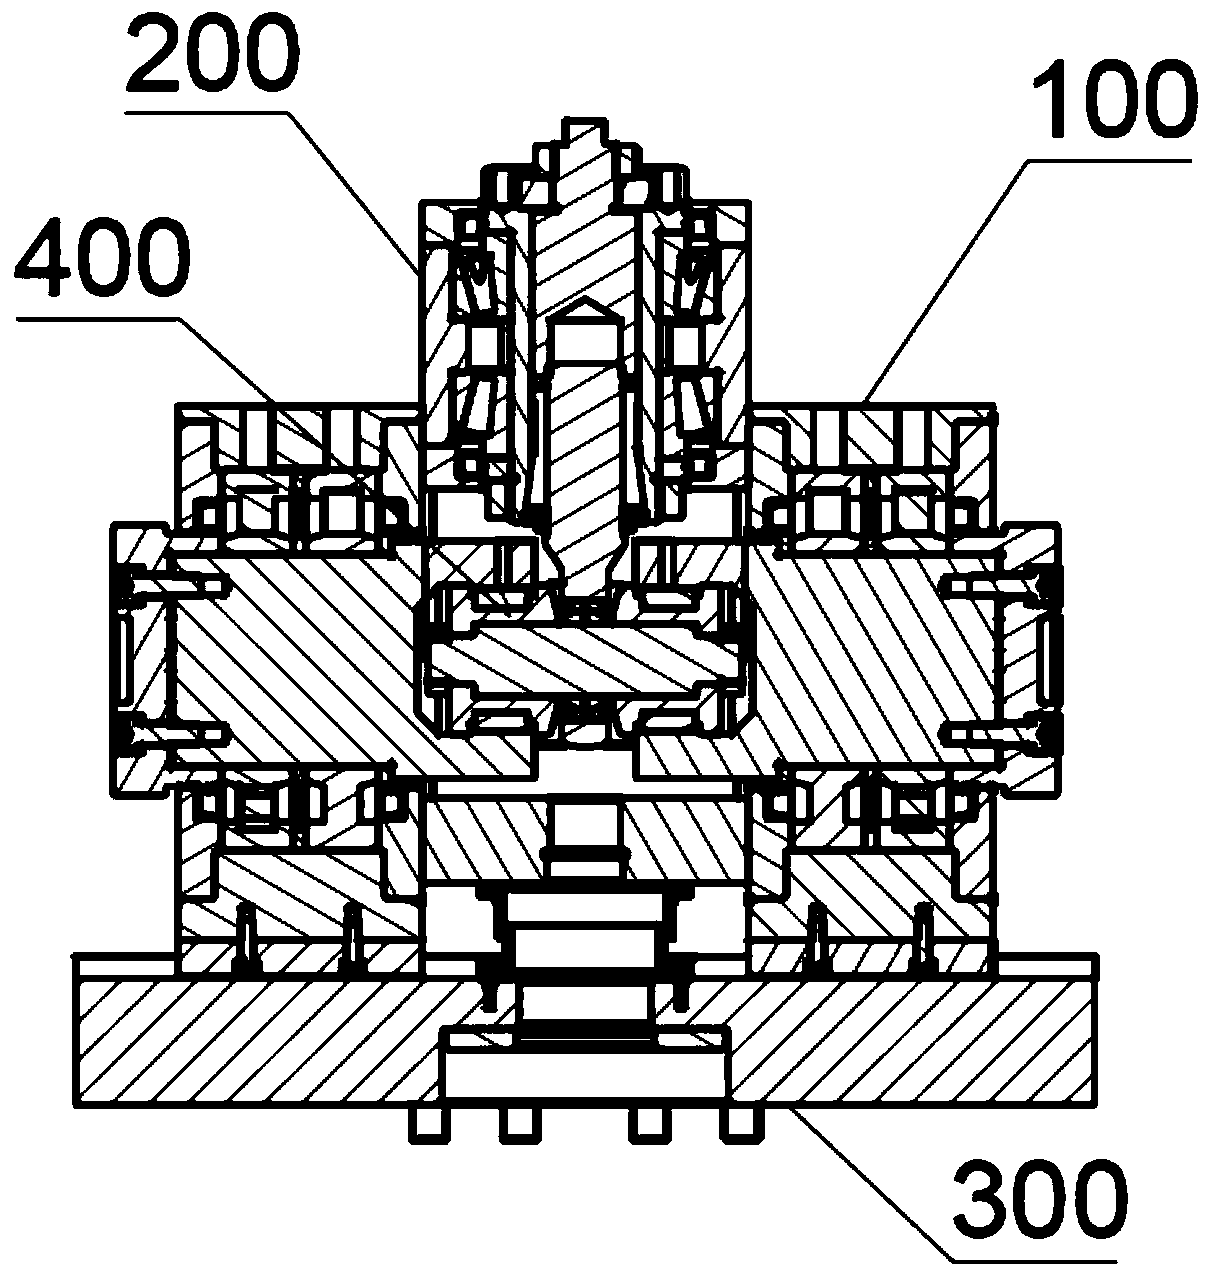 Four-dimensional motion separation mechanism applied to bearing test